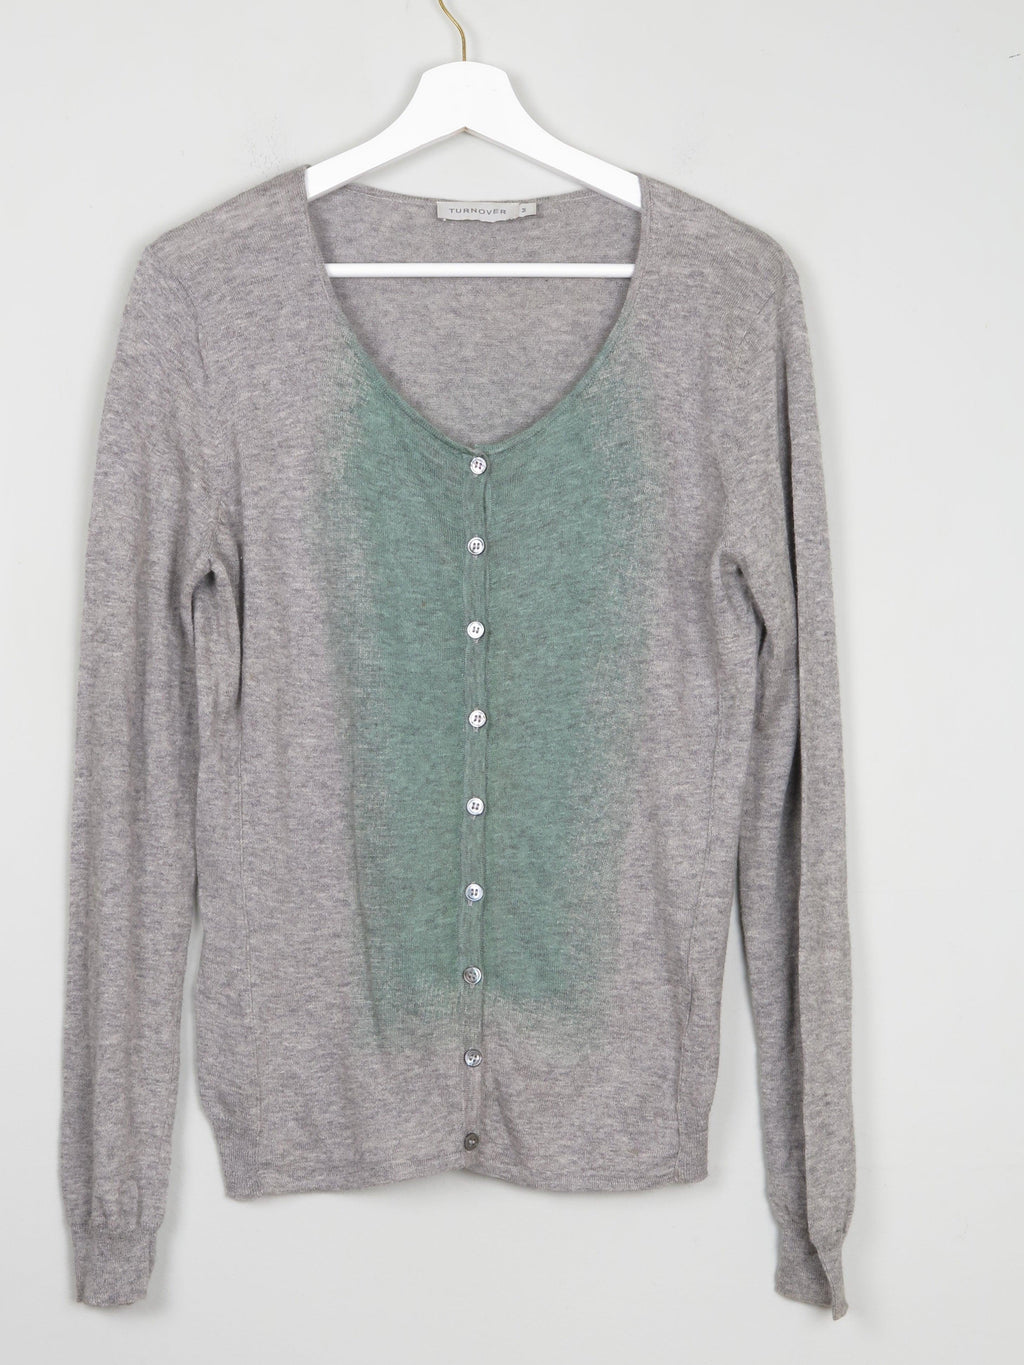 Women's Grey & Green Fine Knit Turnover Cardigan M - The Harlequin